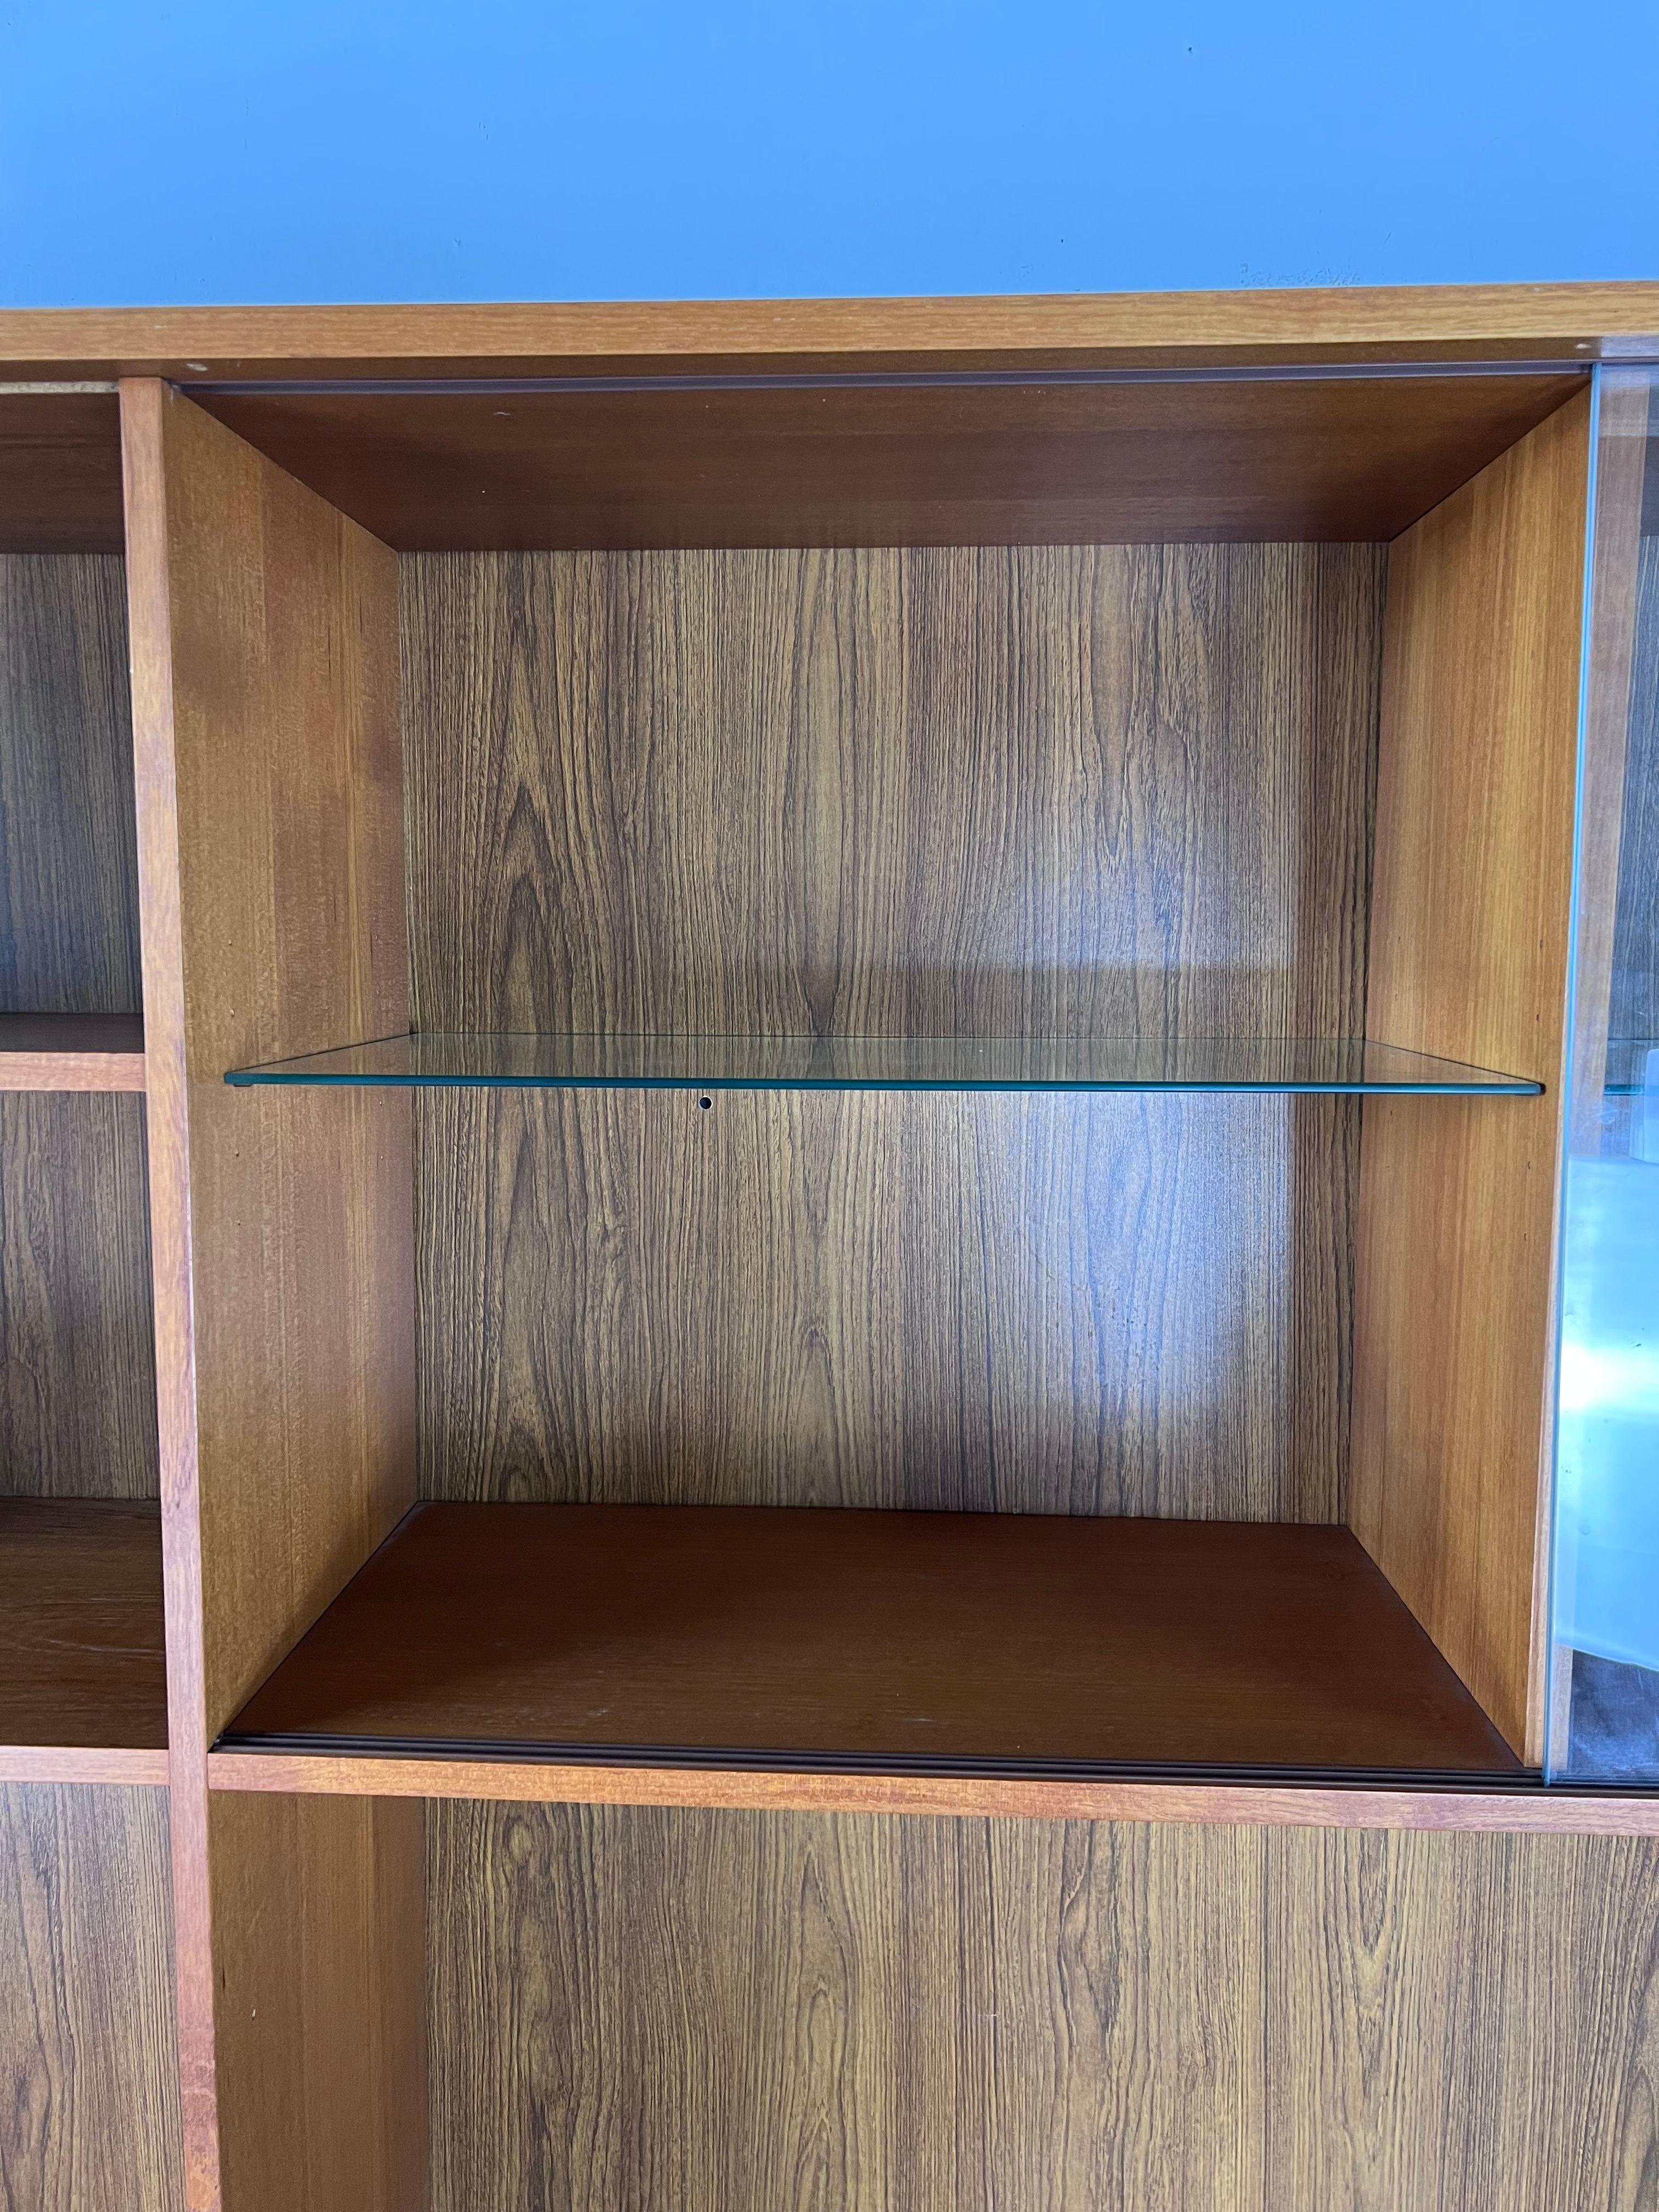 Danish Modern Shelving Unit with Sliding Glass Doors In Good Condition For Sale In Freehold, NJ